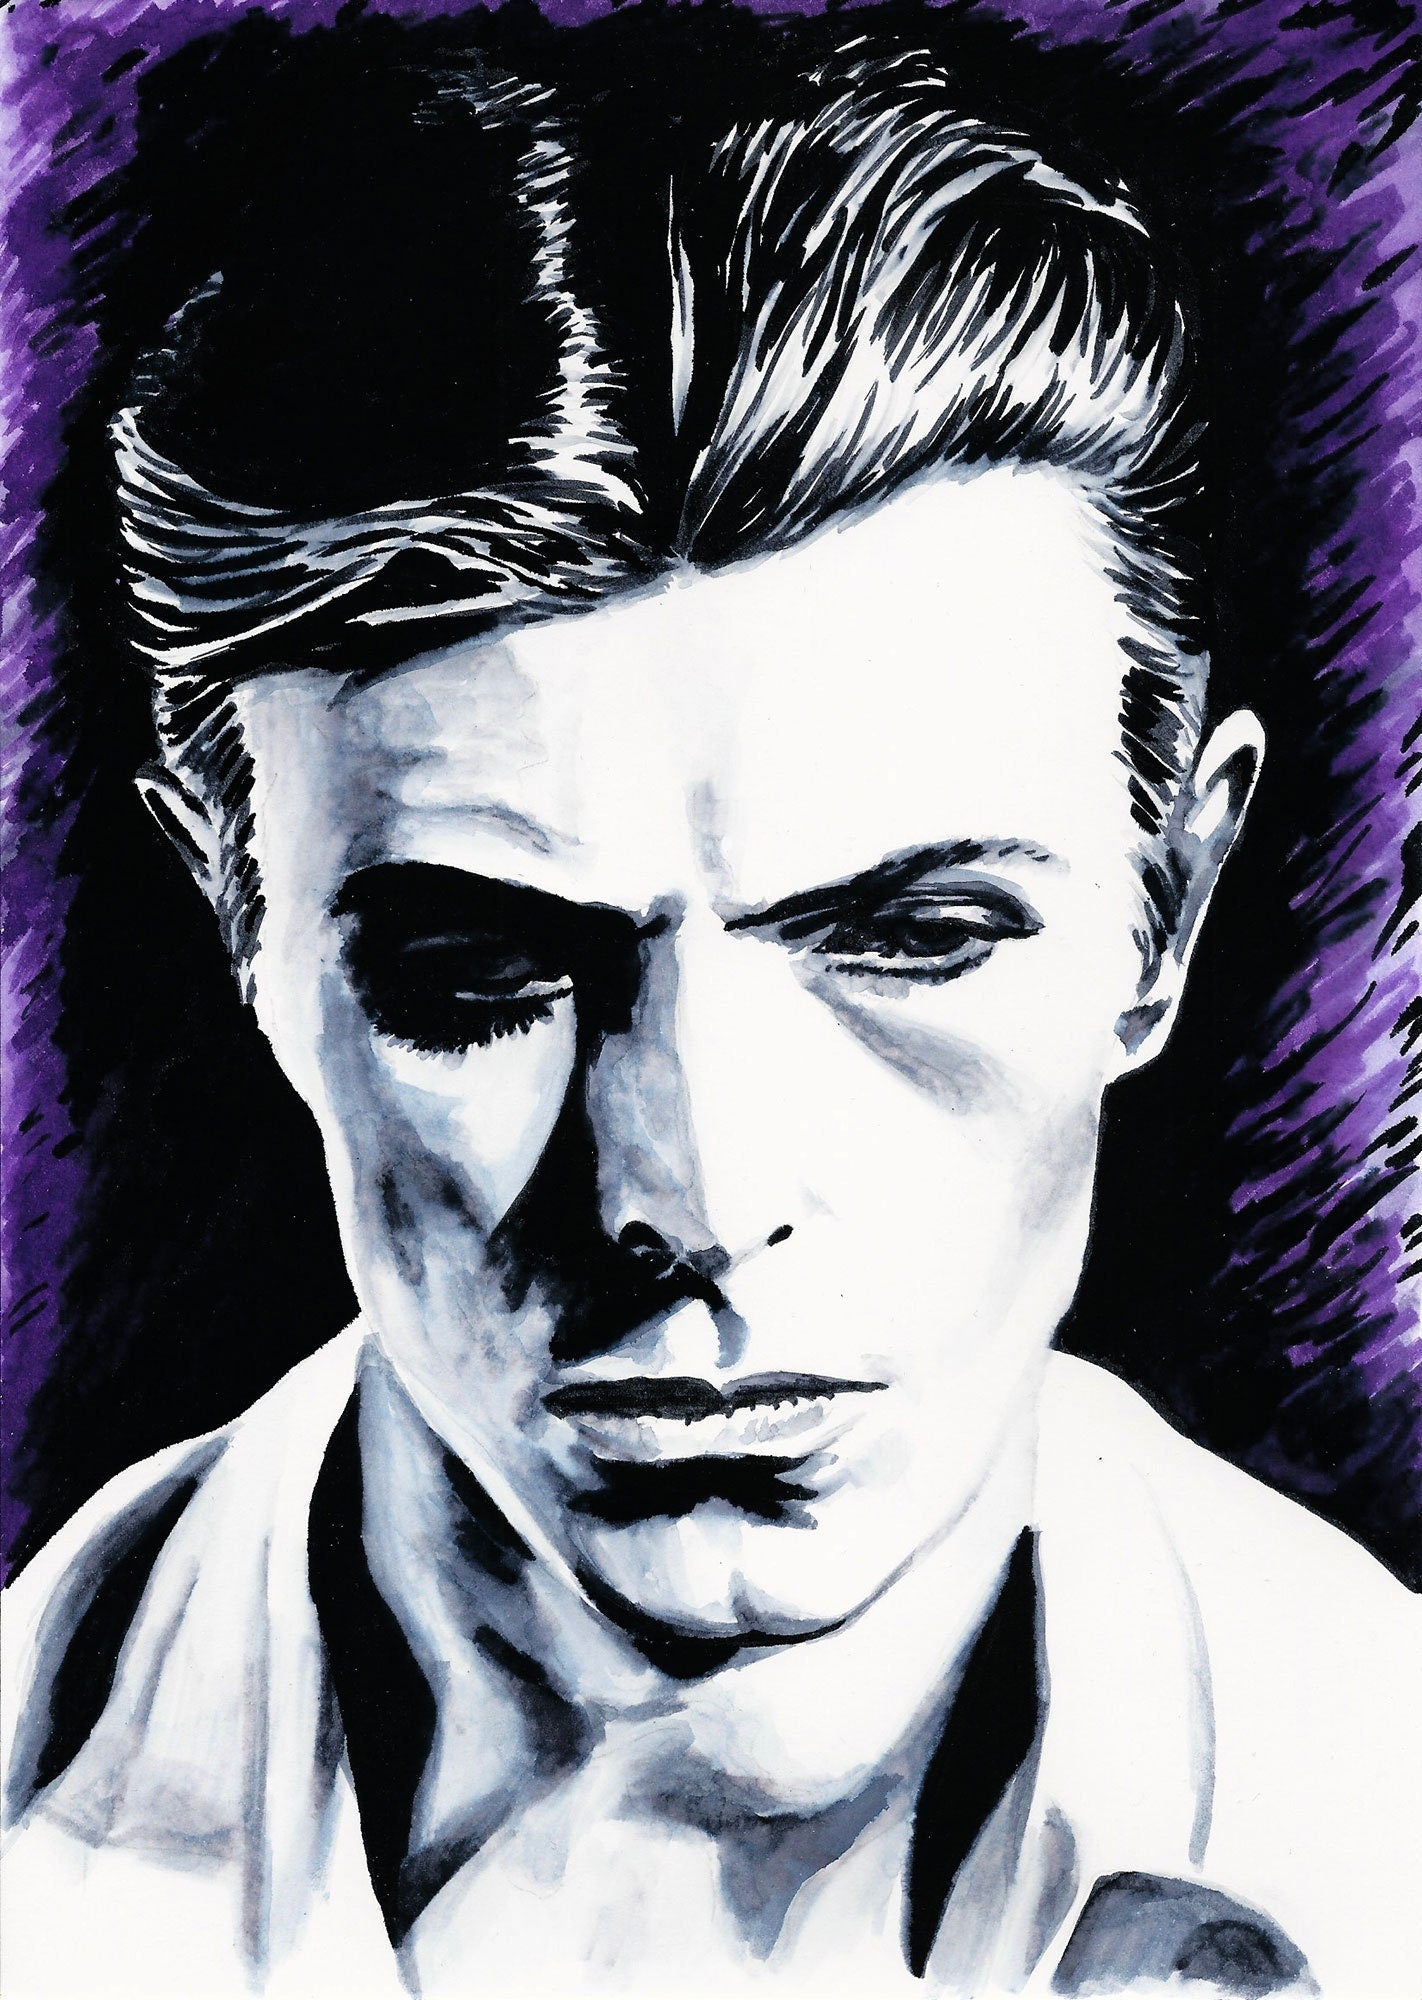 David Bowie greeting card, gift for Bowie fan, Birthday Card, Bowie art card, David Bowie card, Thin White Duke card, Bowie birthday card